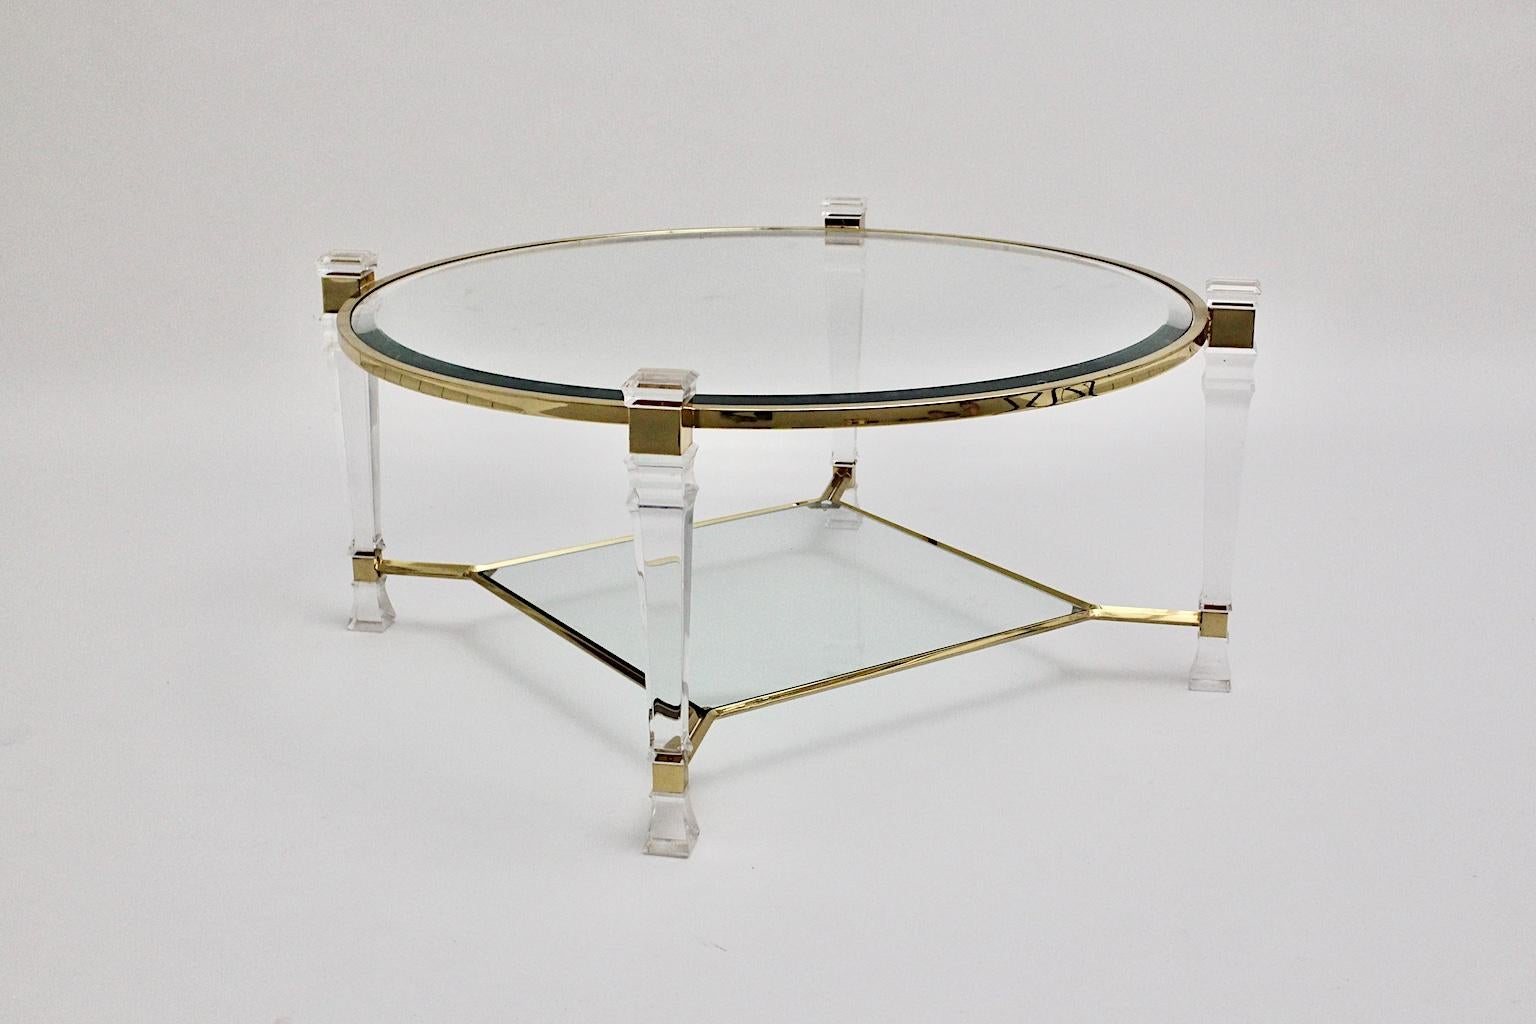 Hollywood Regency style vintage coffee table or sofa table from lucite and glass Pierre Vandel style circa 1970, France.
An elegant two-tiered coffee table with a lucite table frame and golden details and also two clear glass plates.
The top plate